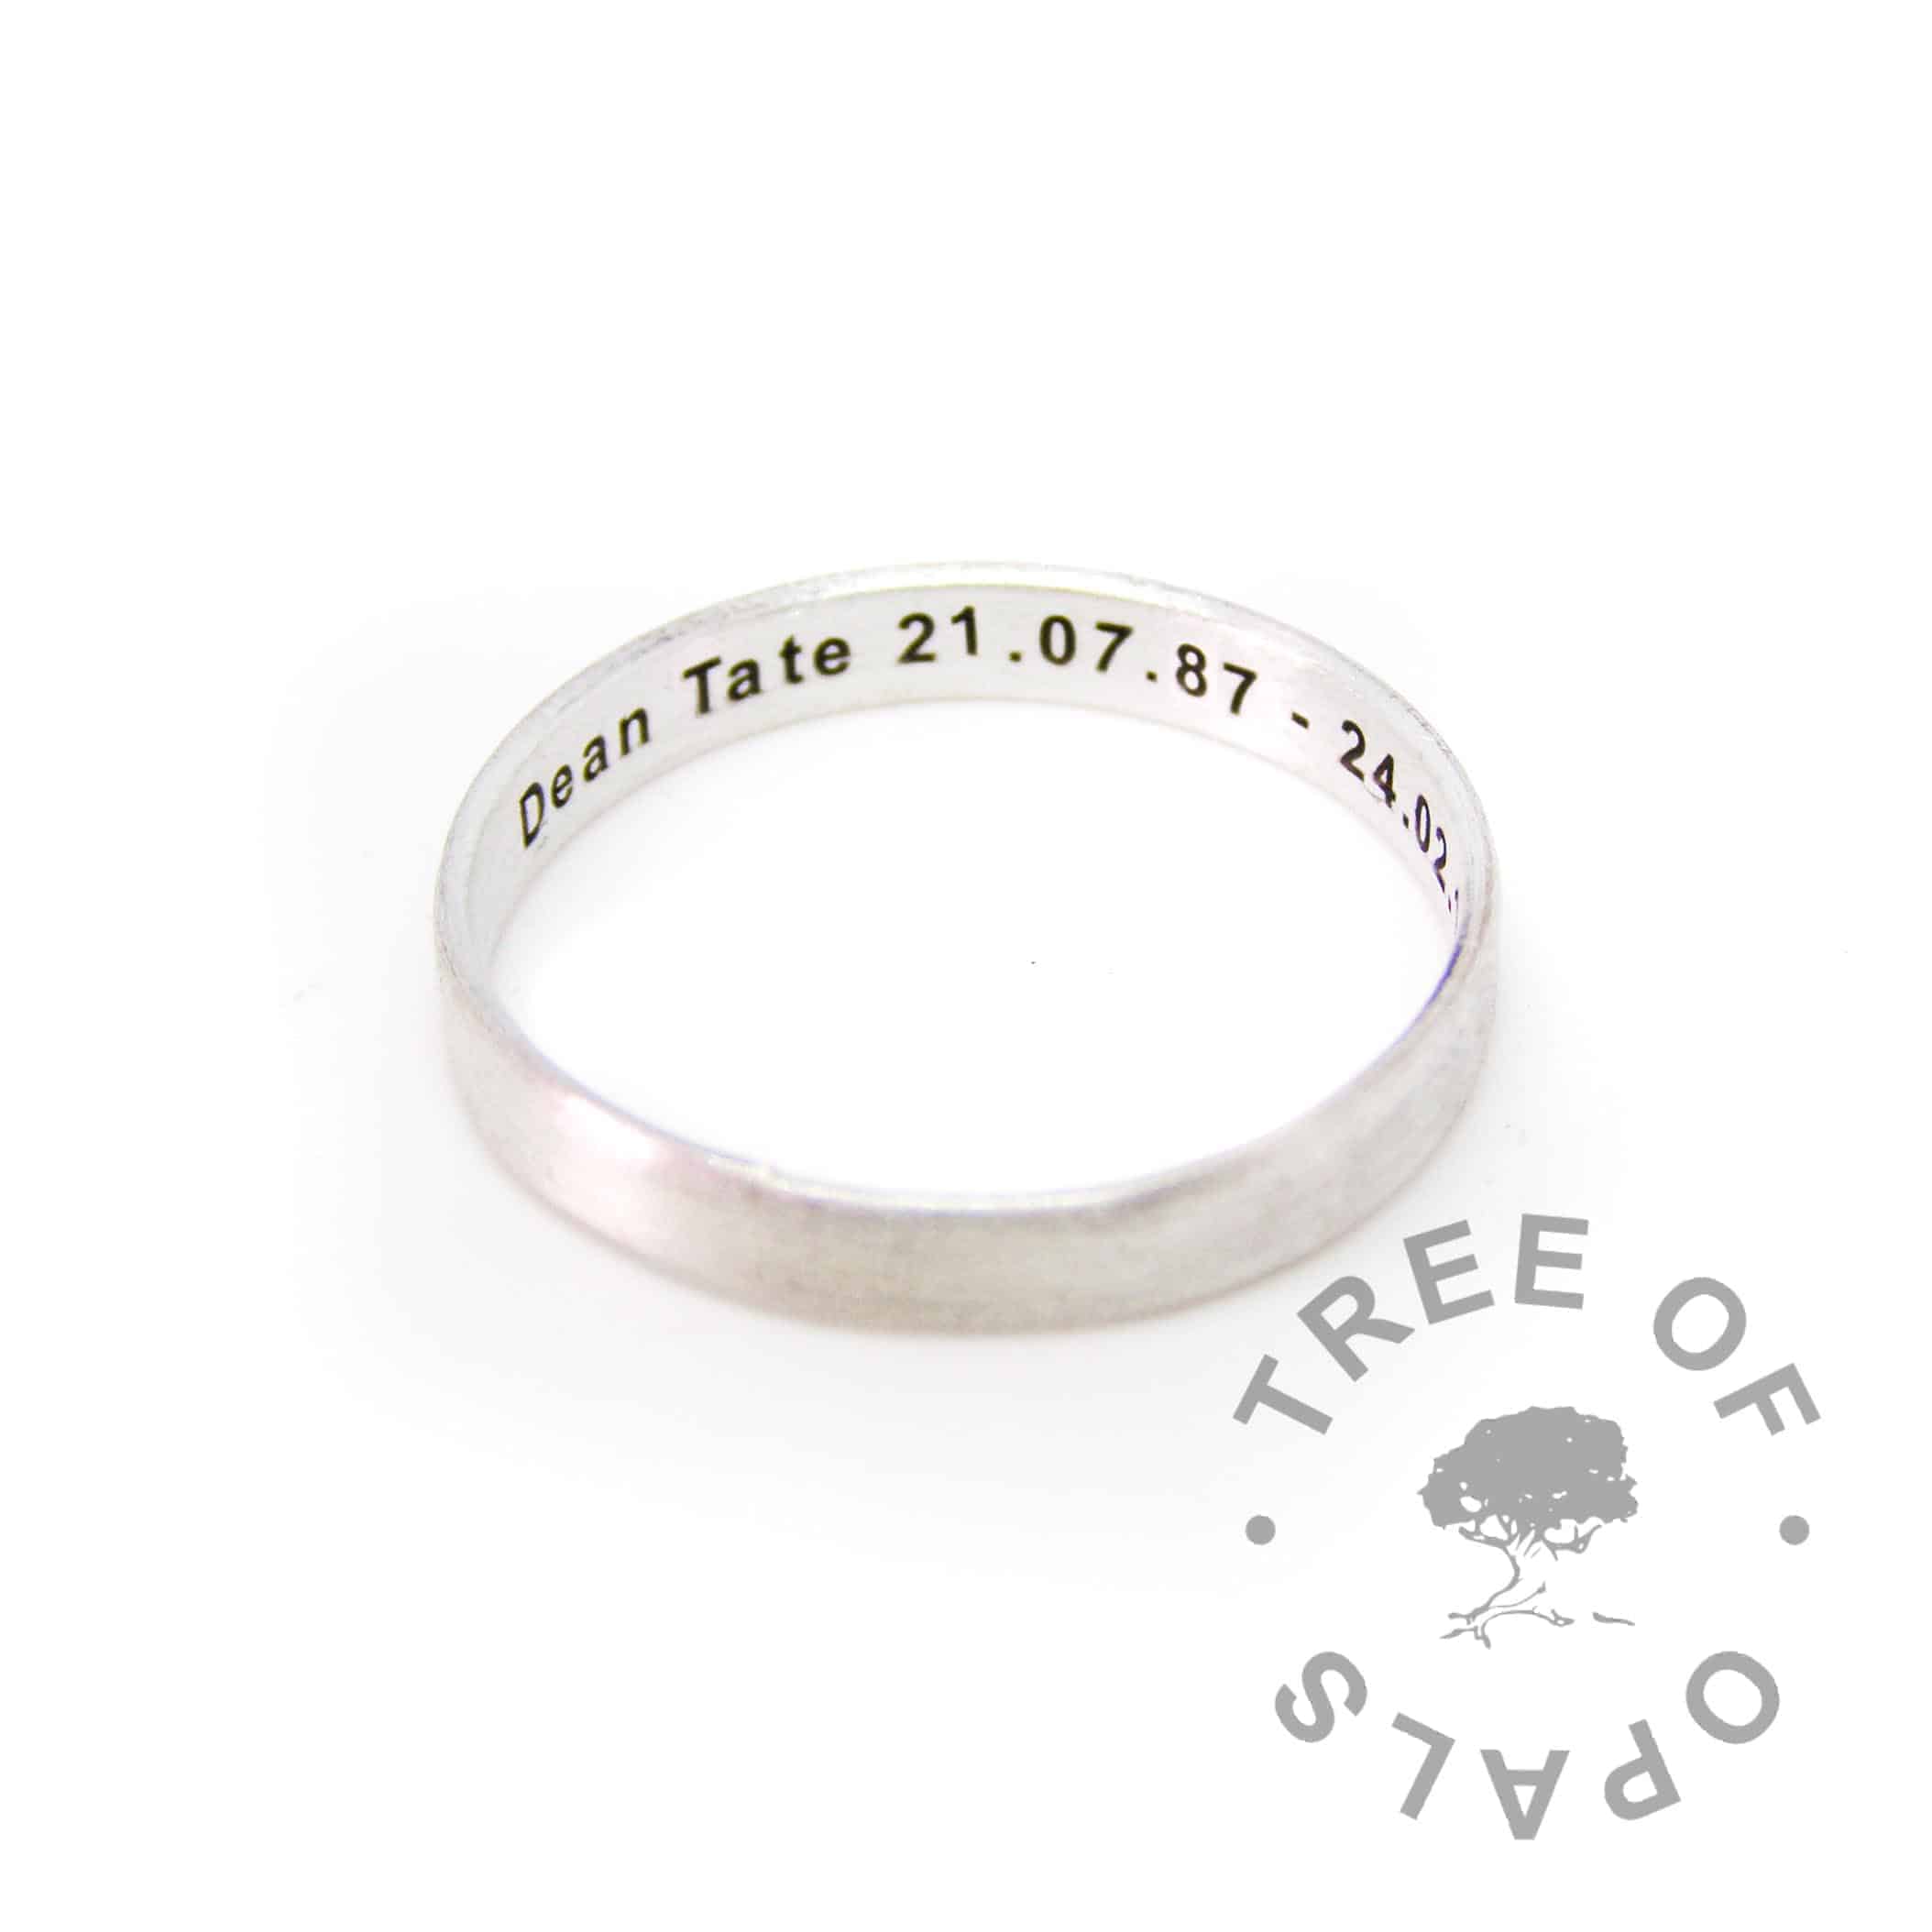 brushed band engraved silver stacking ring, 3mm wide silver totally handmade from scratch and engraved inside with a name and dates of birth and death